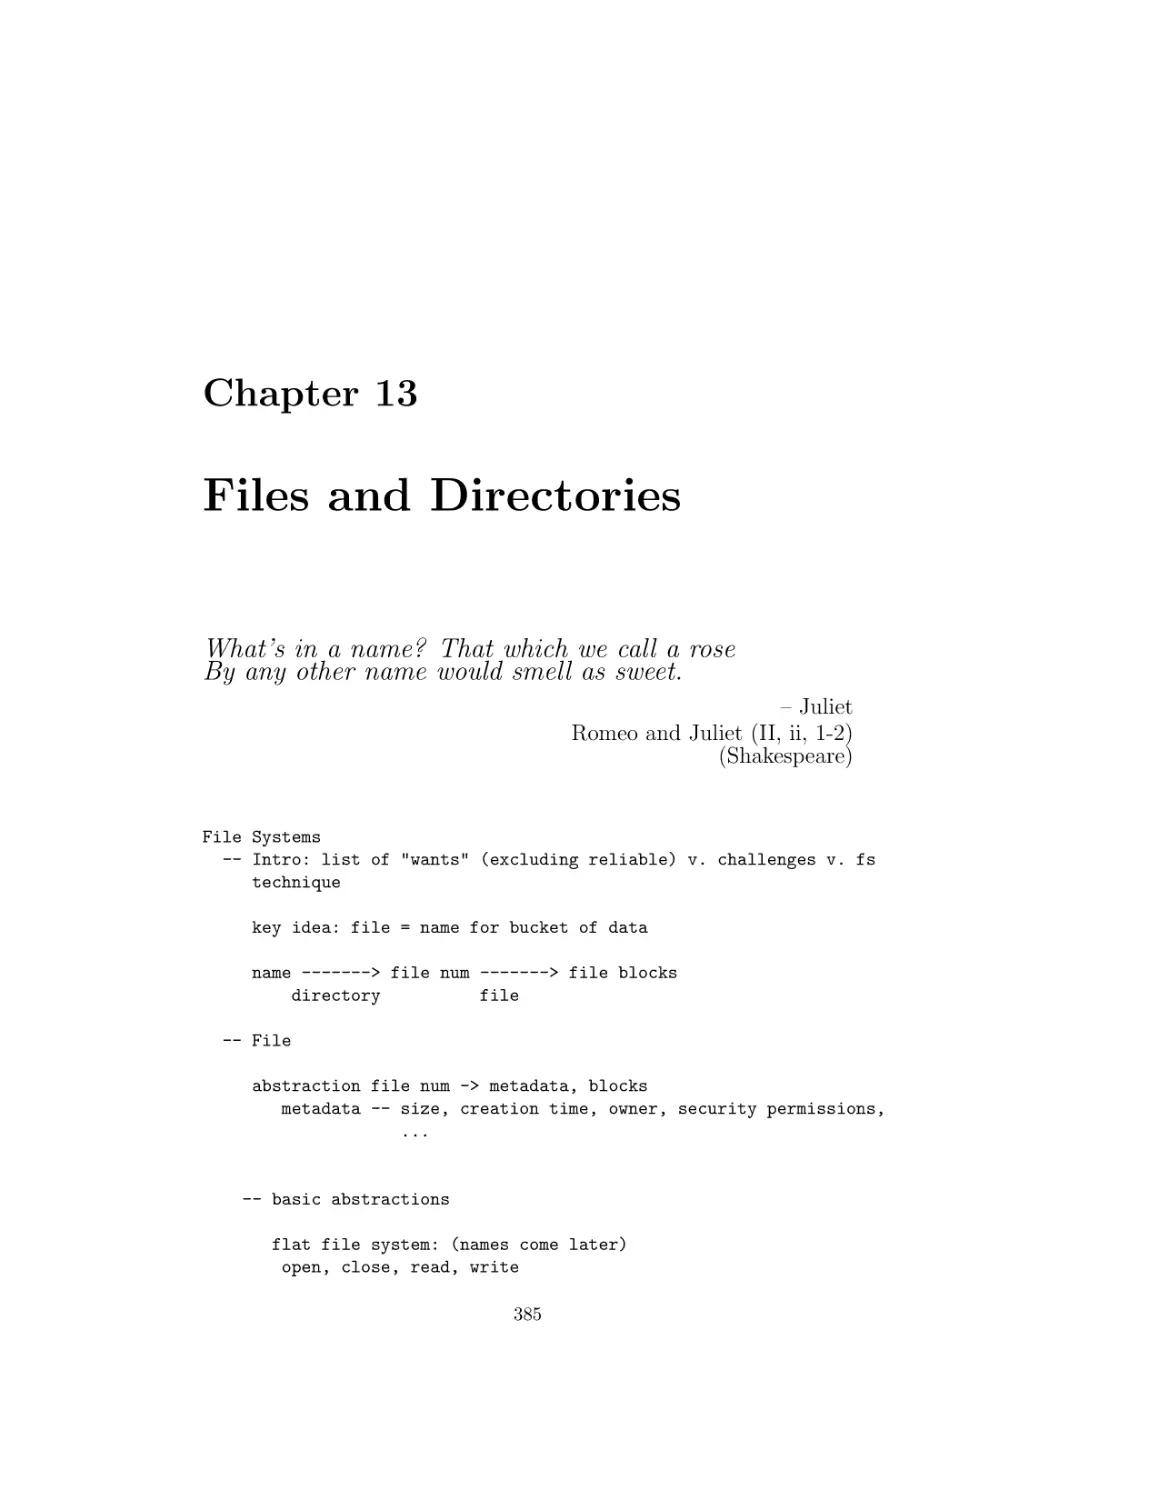 Files and Directories